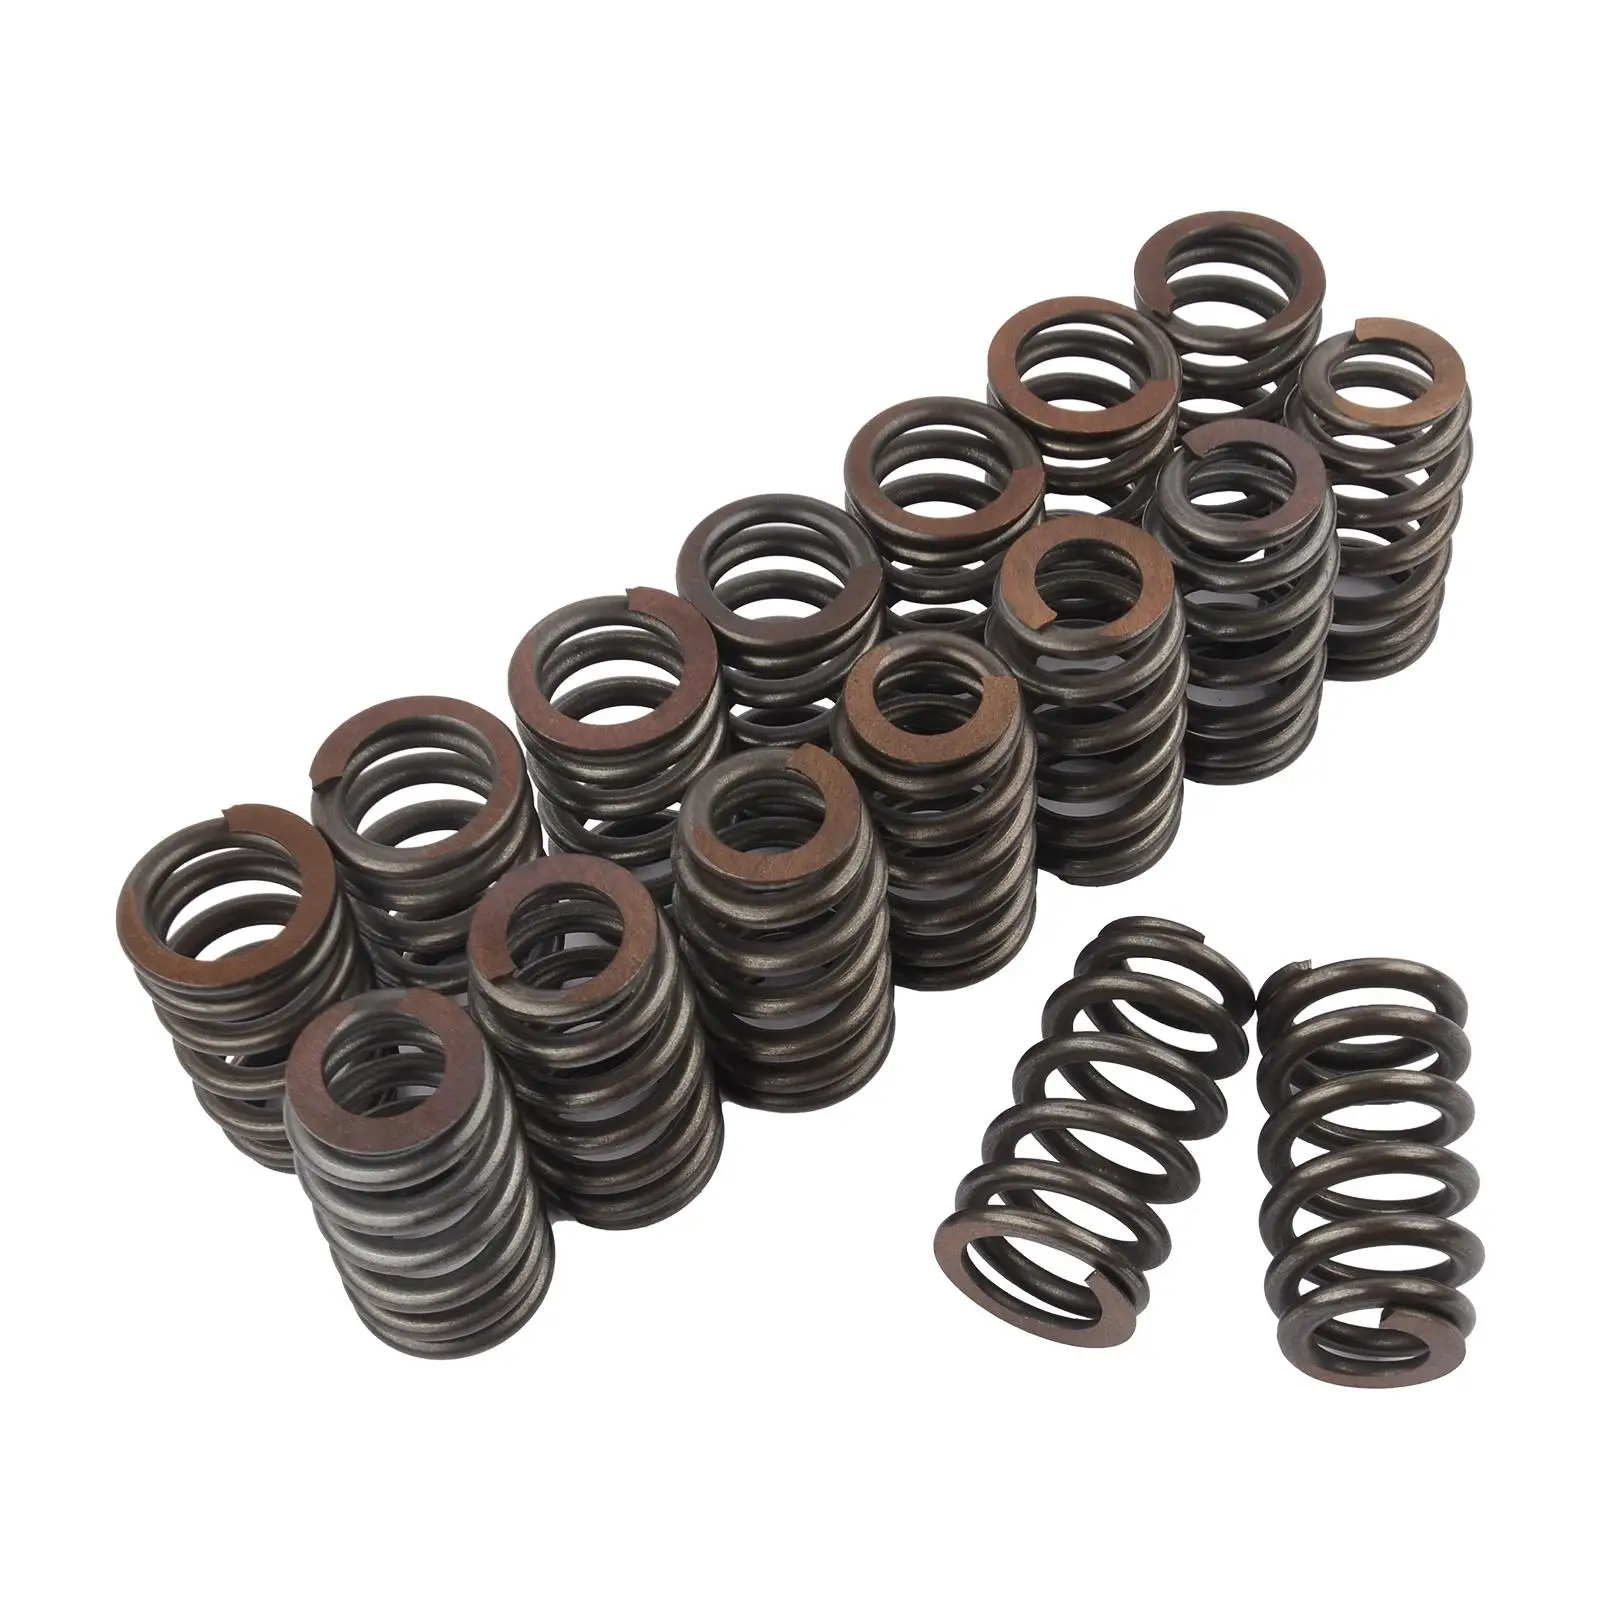 

AP02 For PAC-1218 Drop-In Beehive Valve Spring Kit for all LS Engines - .600" Lift Rated